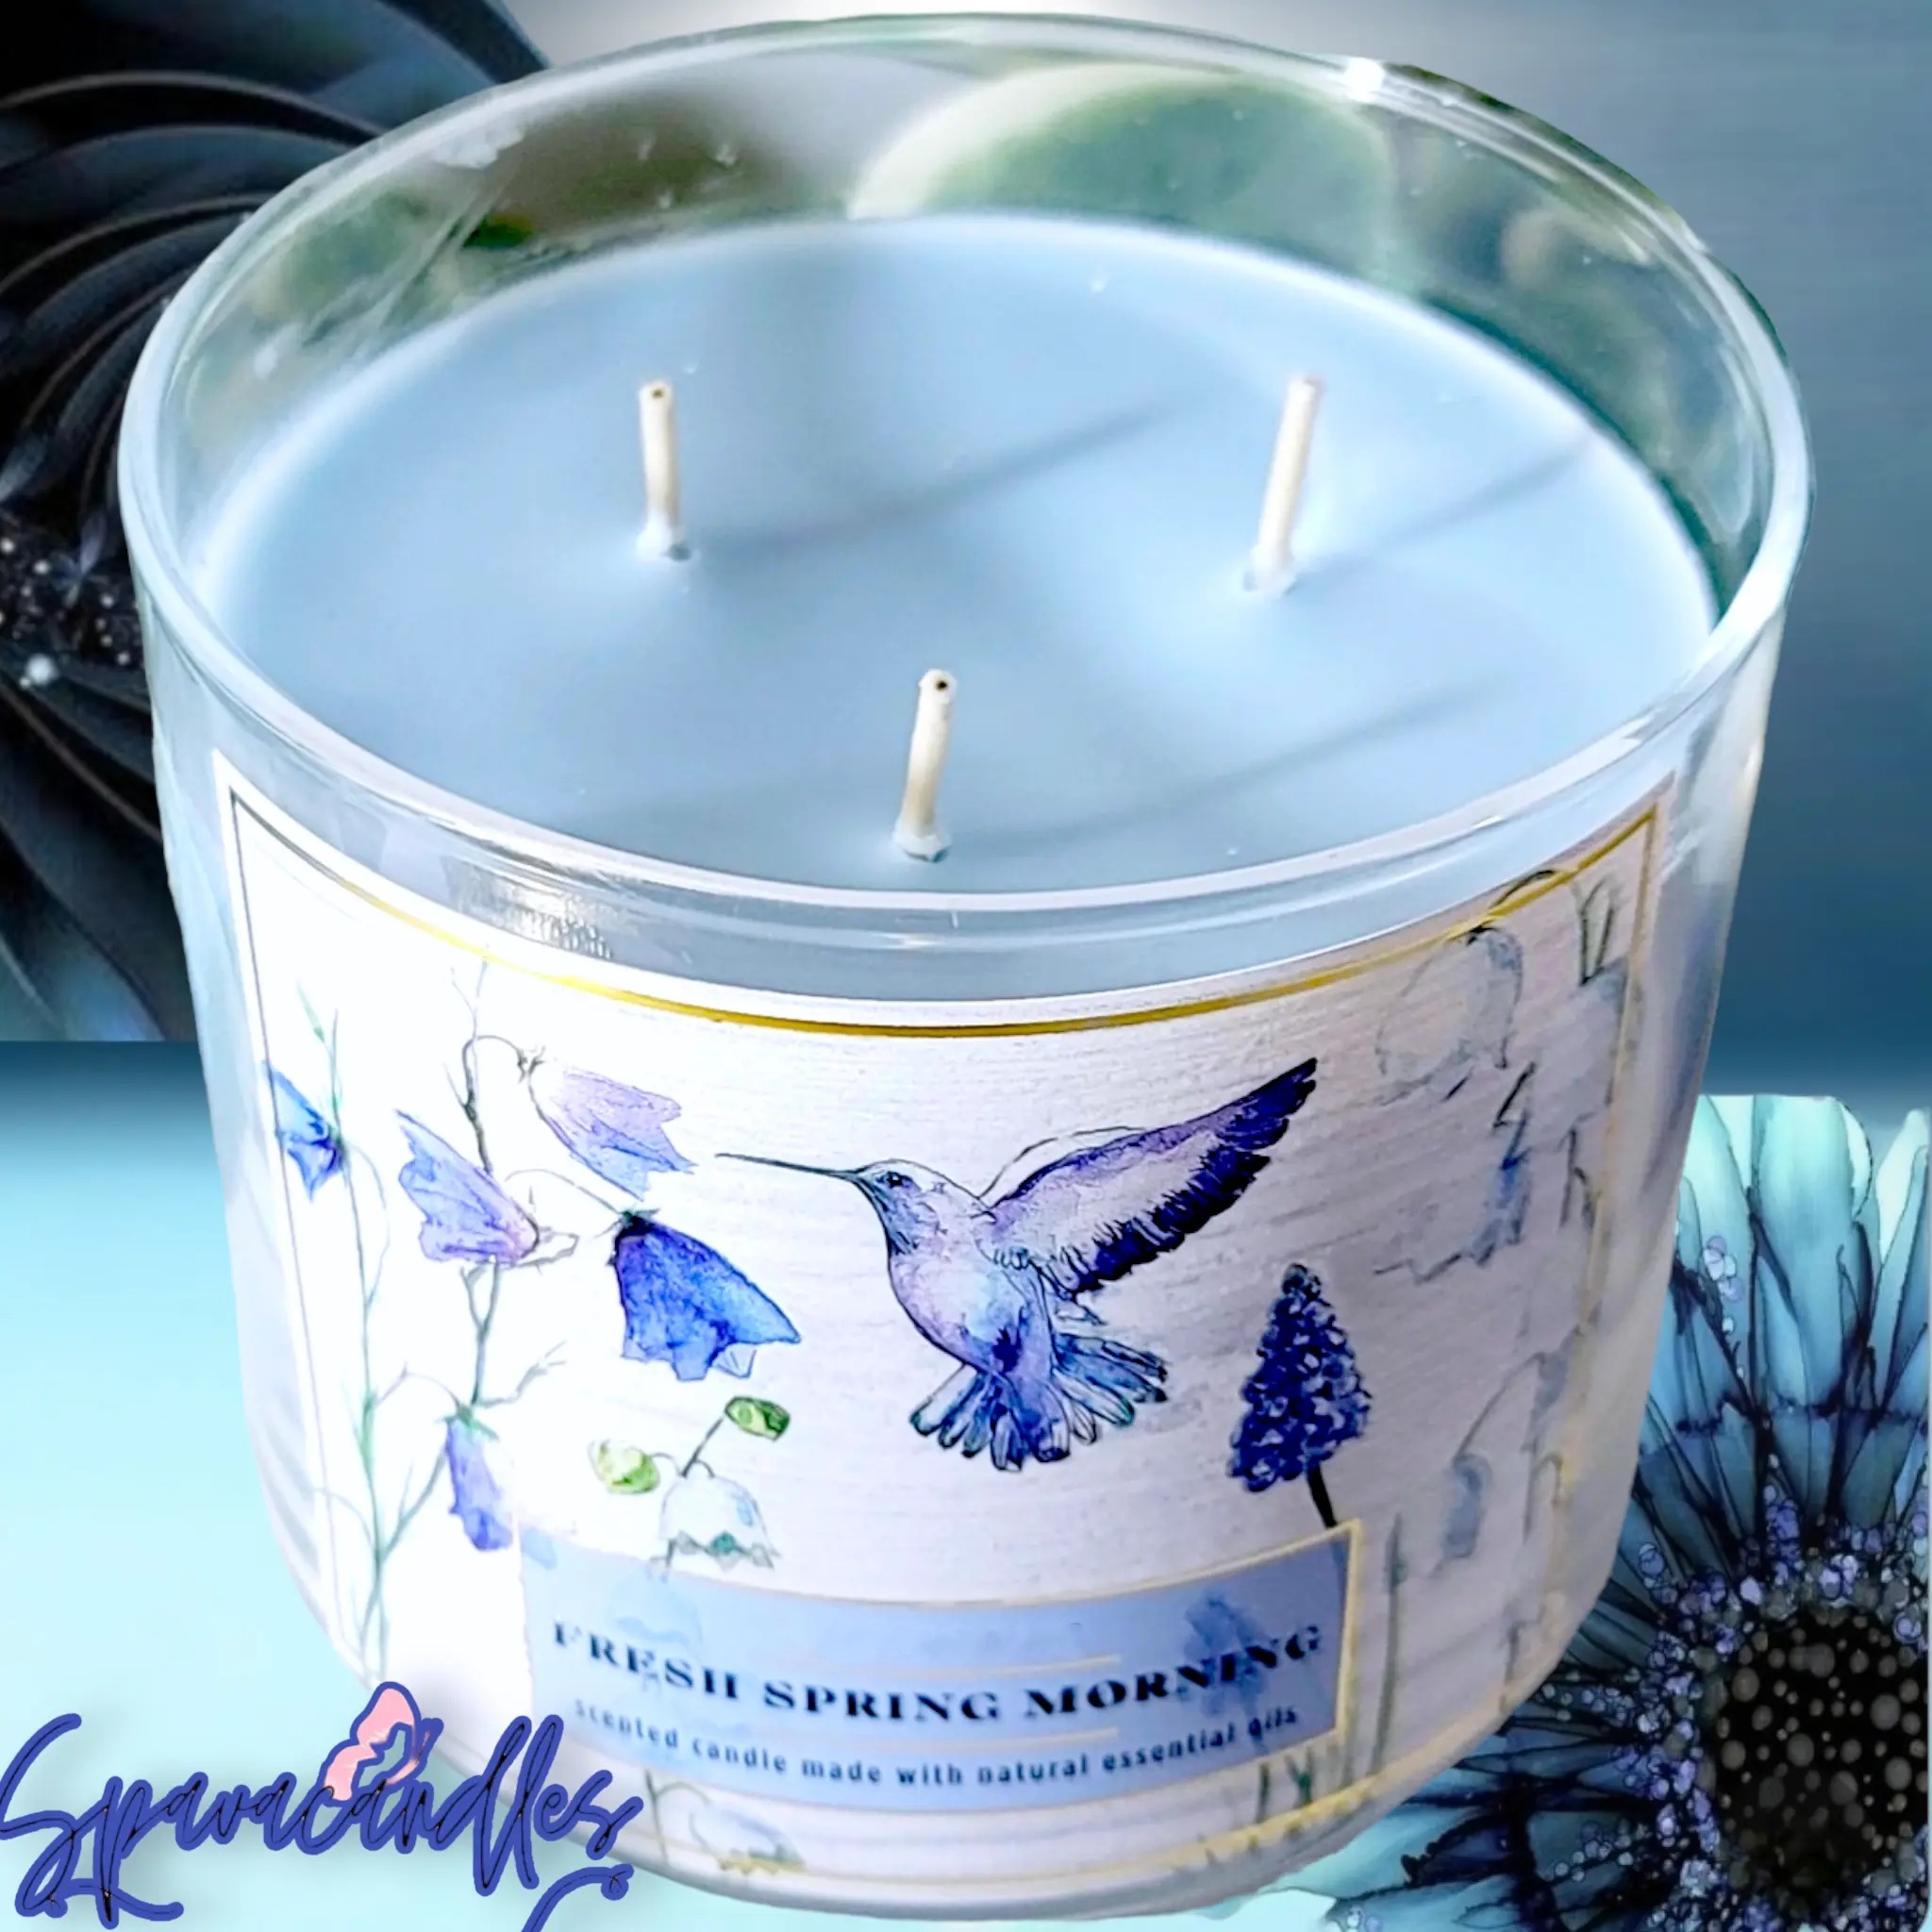 fresh spring morning 3 Wick Candle 14.5 oz. New 2022